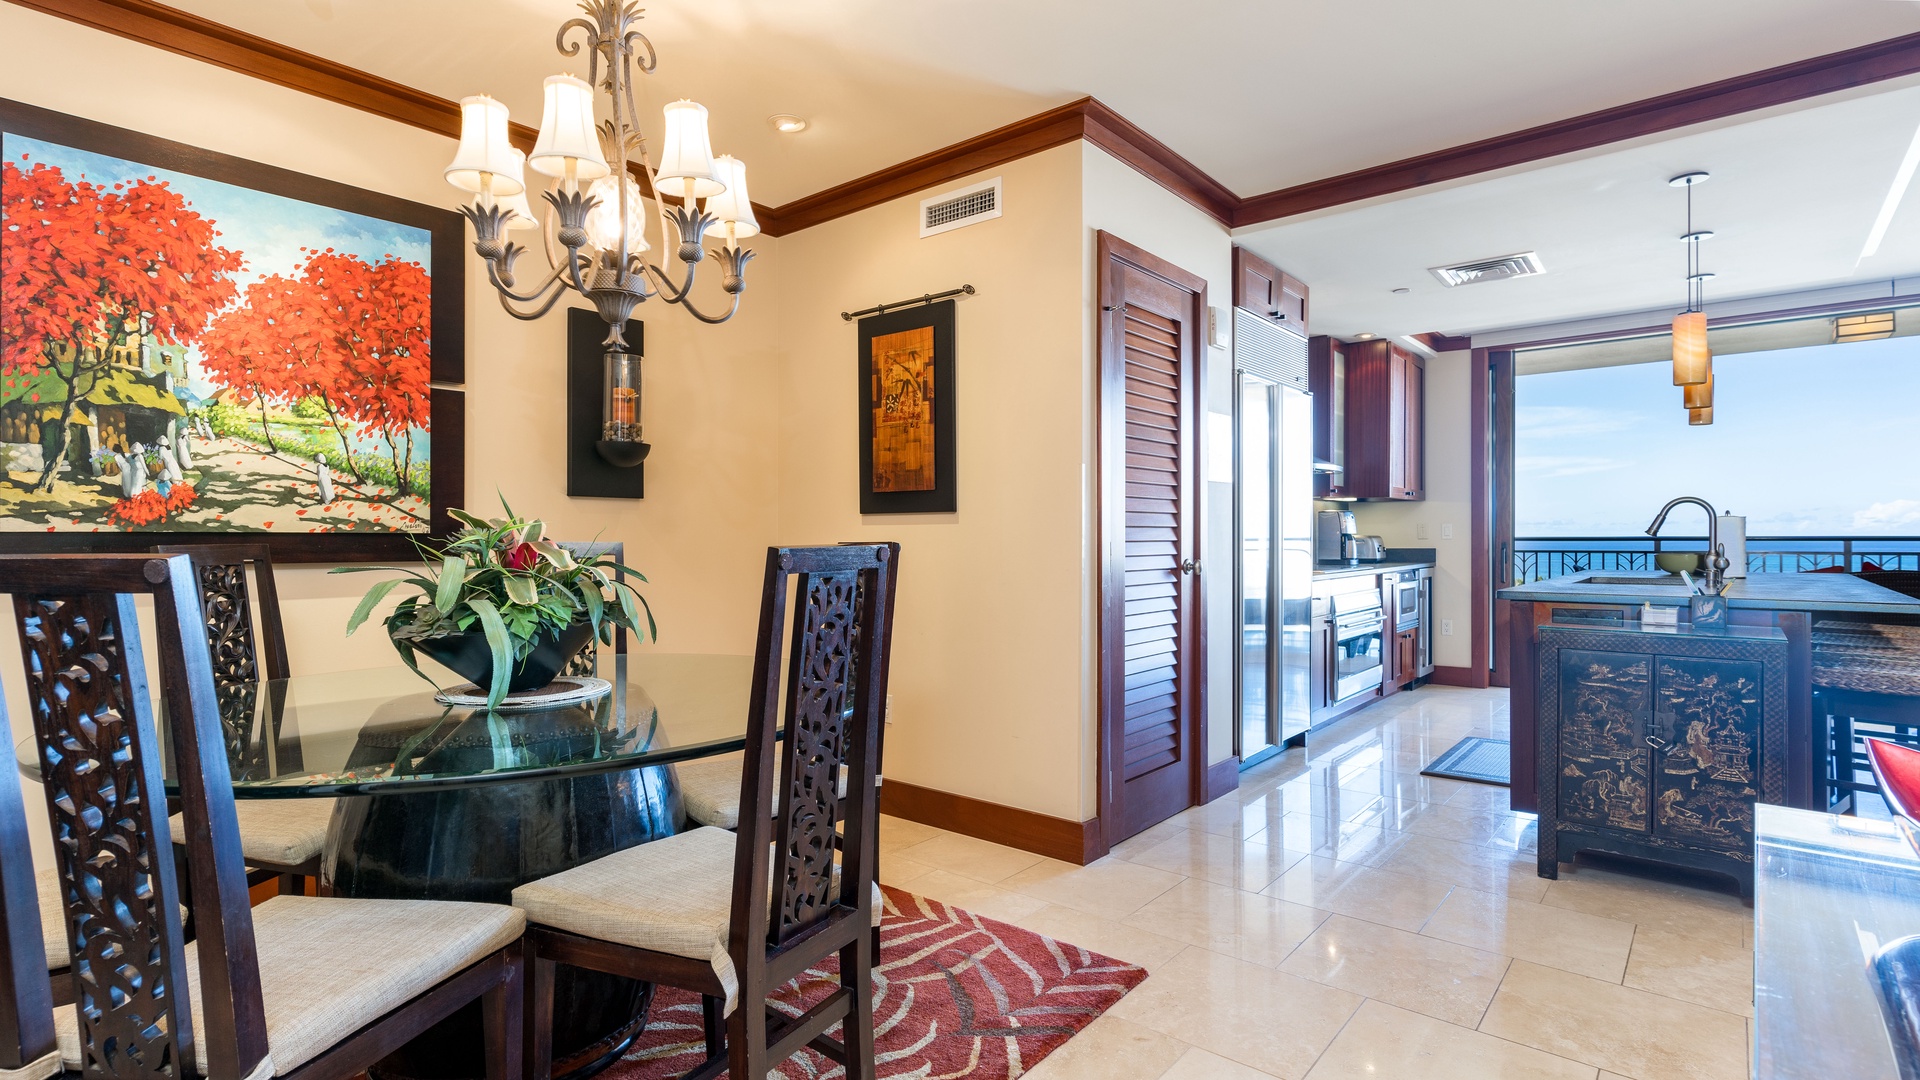 Kapolei Vacation Rentals, Ko Olina Beach Villas O905 - The dining room with formal seating and a soft ambiance.